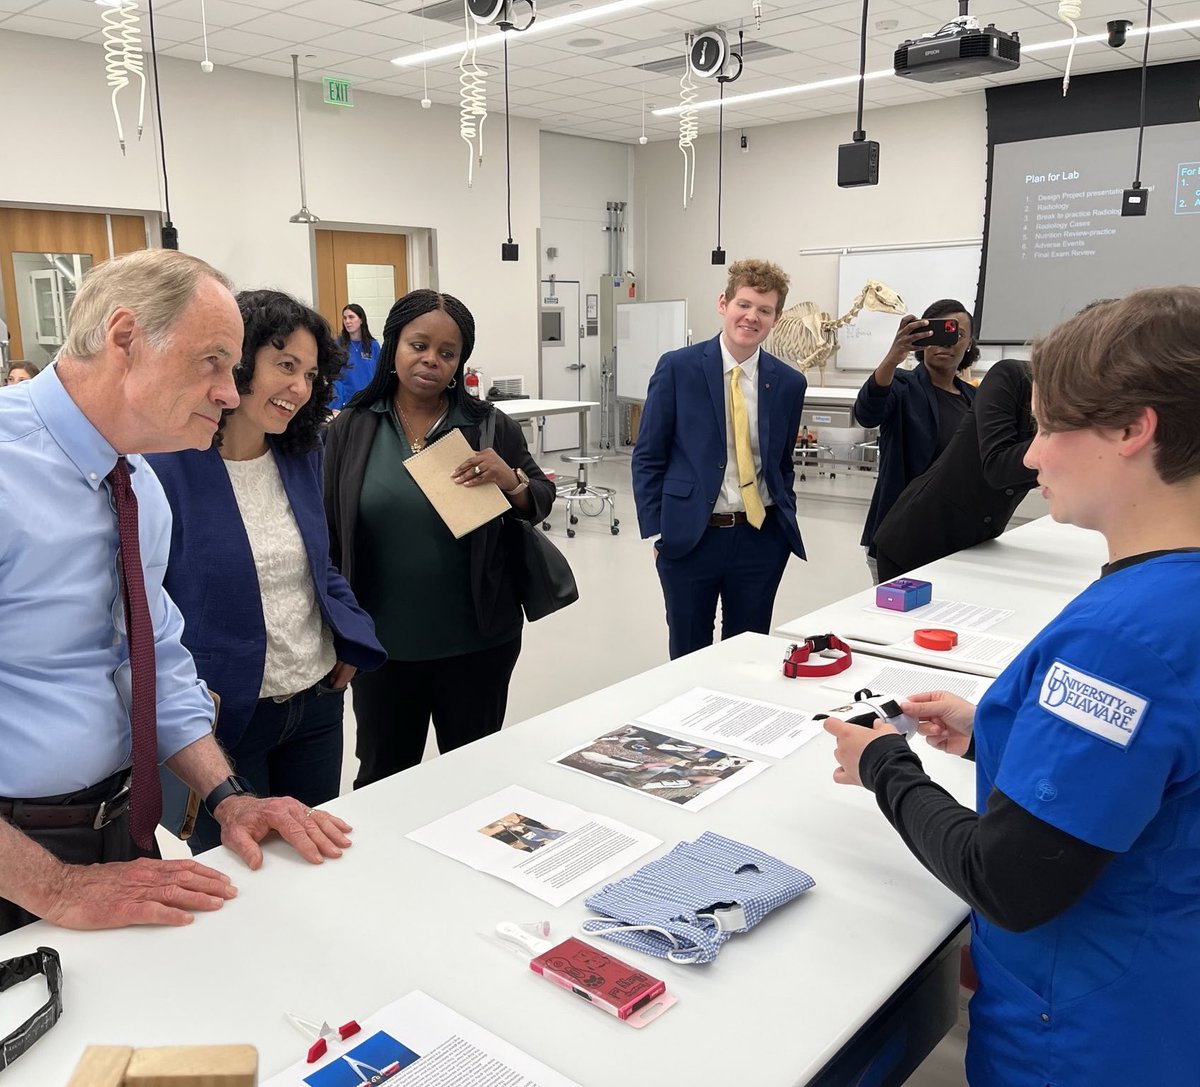 It was great welcoming @DepSecXoch to @UDelaware today! We saw first-hand how UD is working with @USDA to advance climate-smart practices & sustainability through investments in cutting-edge agricultural research, agriculture & food science programs, & scholarship opportunities.